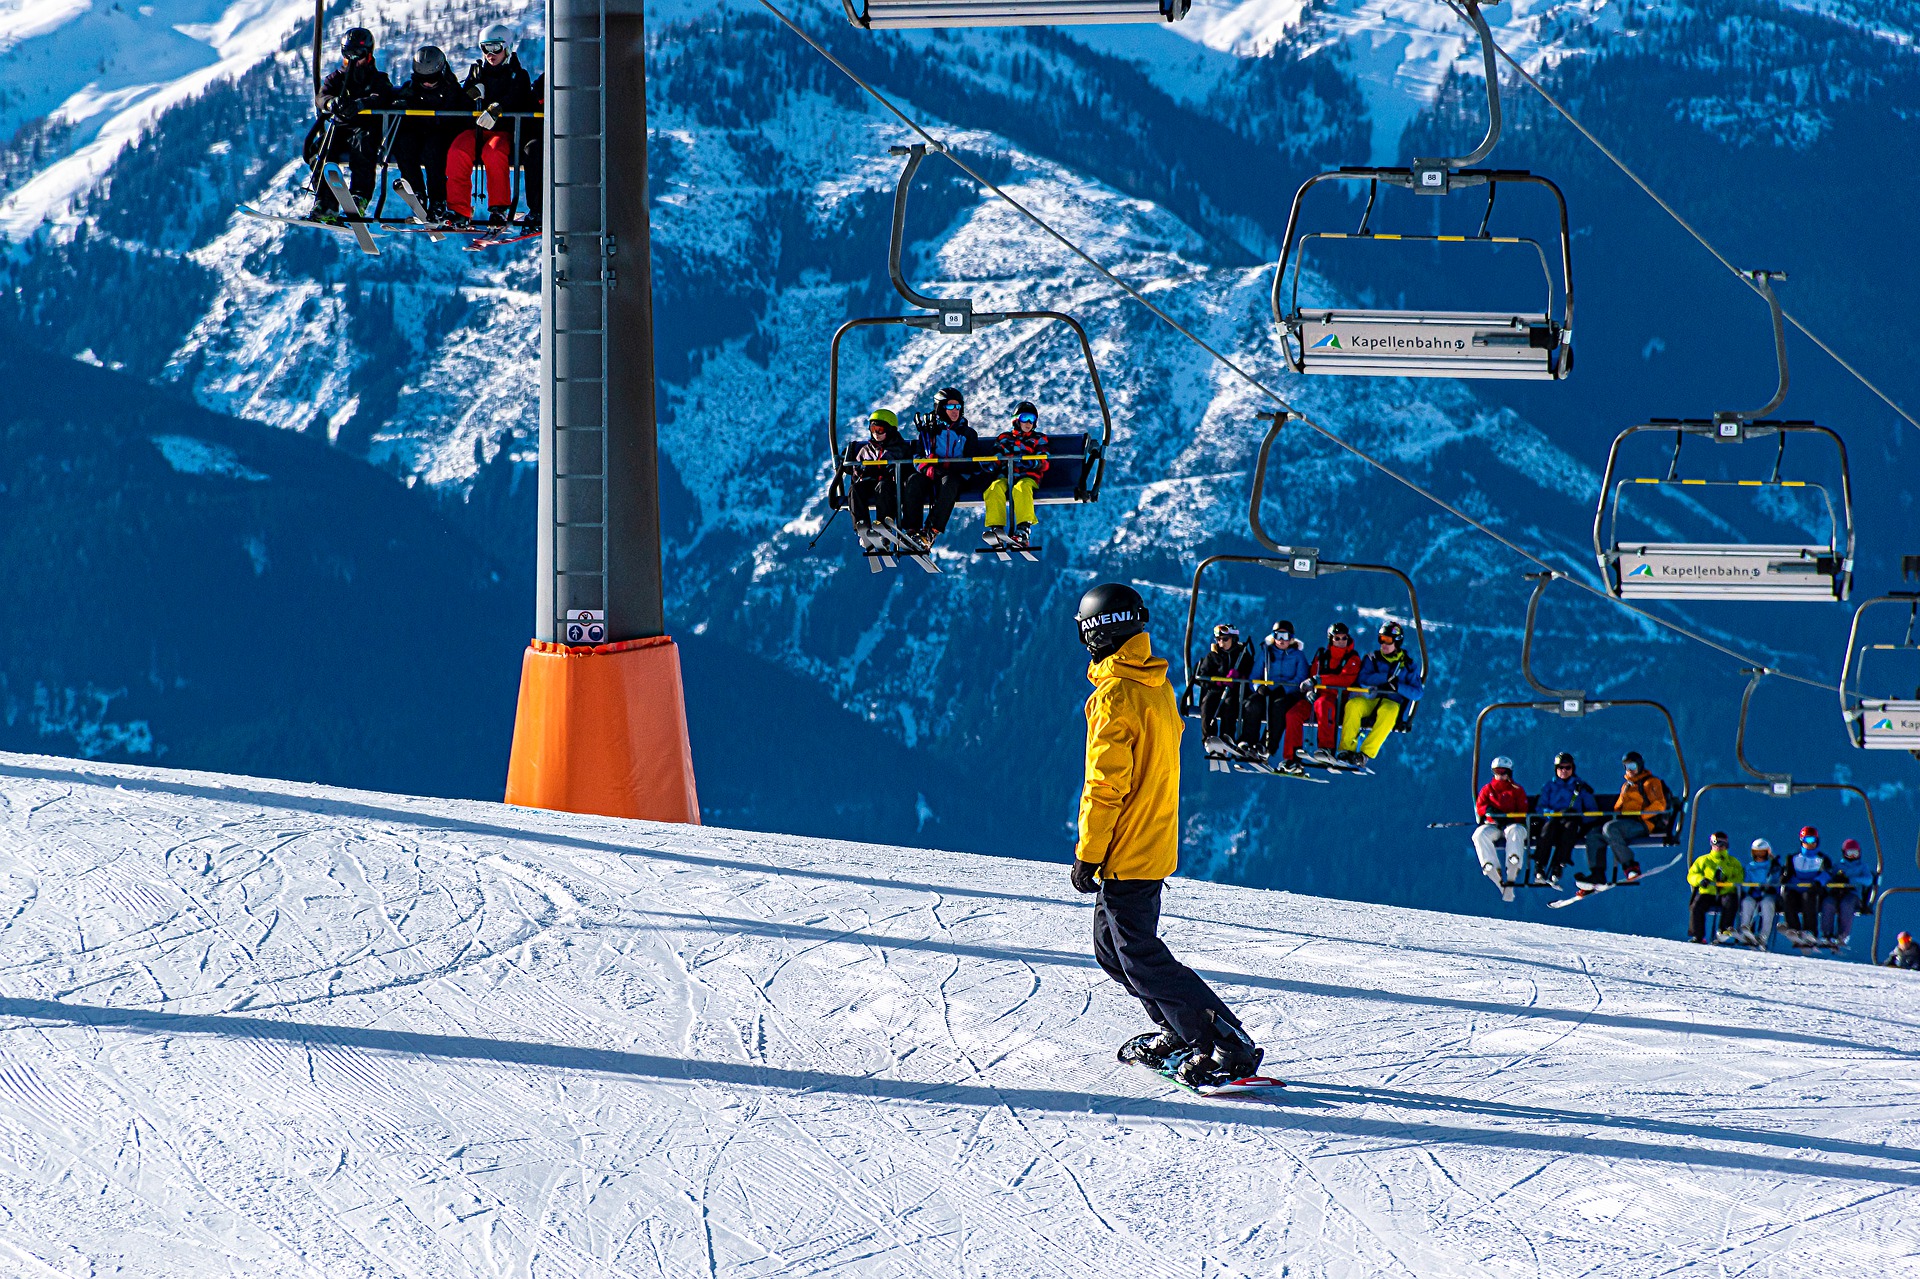 Groups of people riding a ski lift with a snowboarder going down the mountain